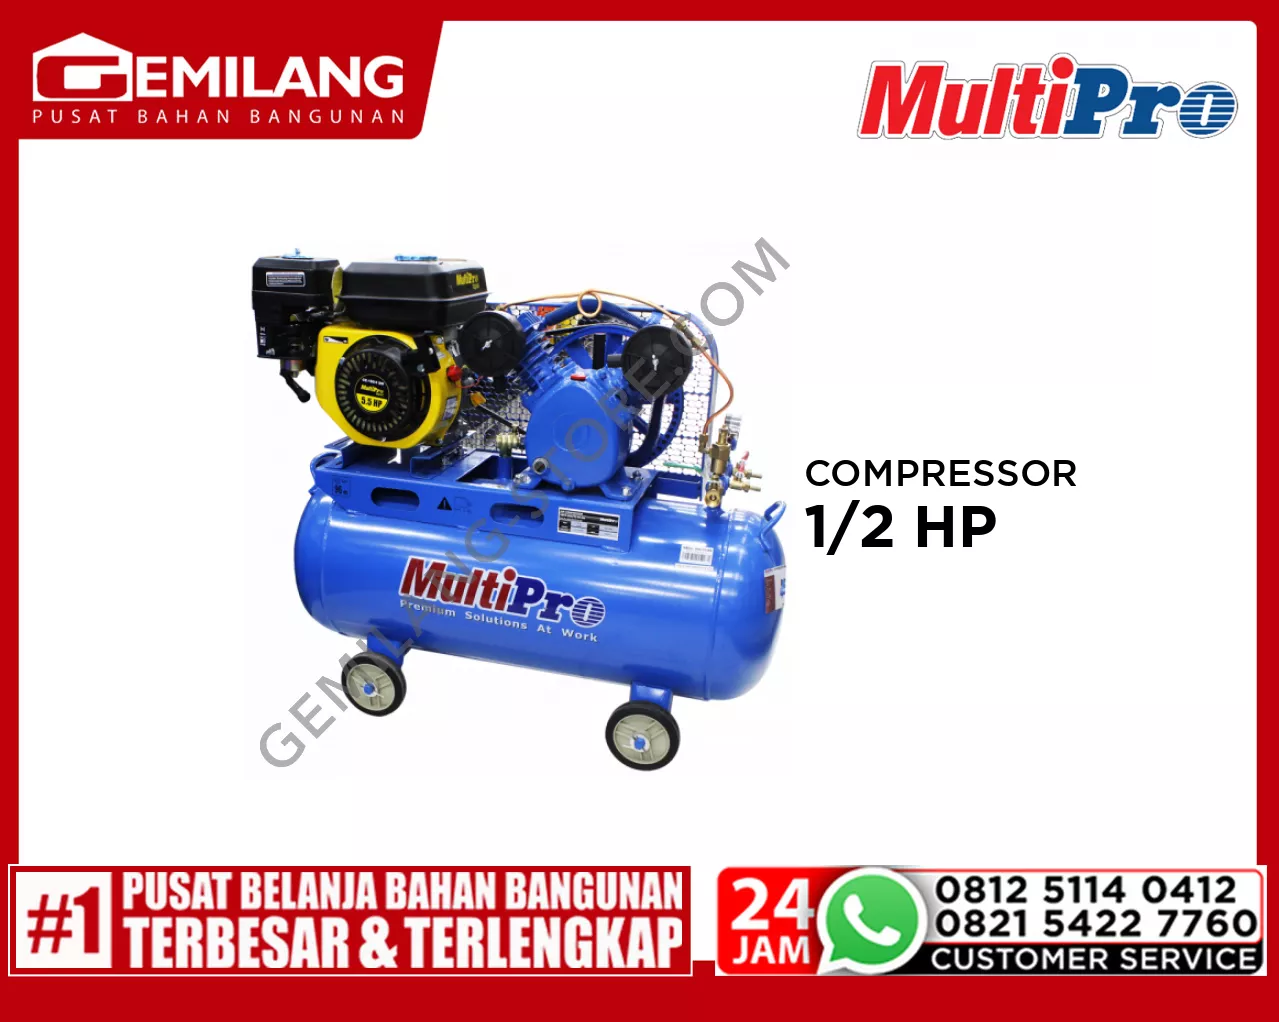 MULTIPRO COMPRESSOR 1/2 HP WITH ENGINE GE160